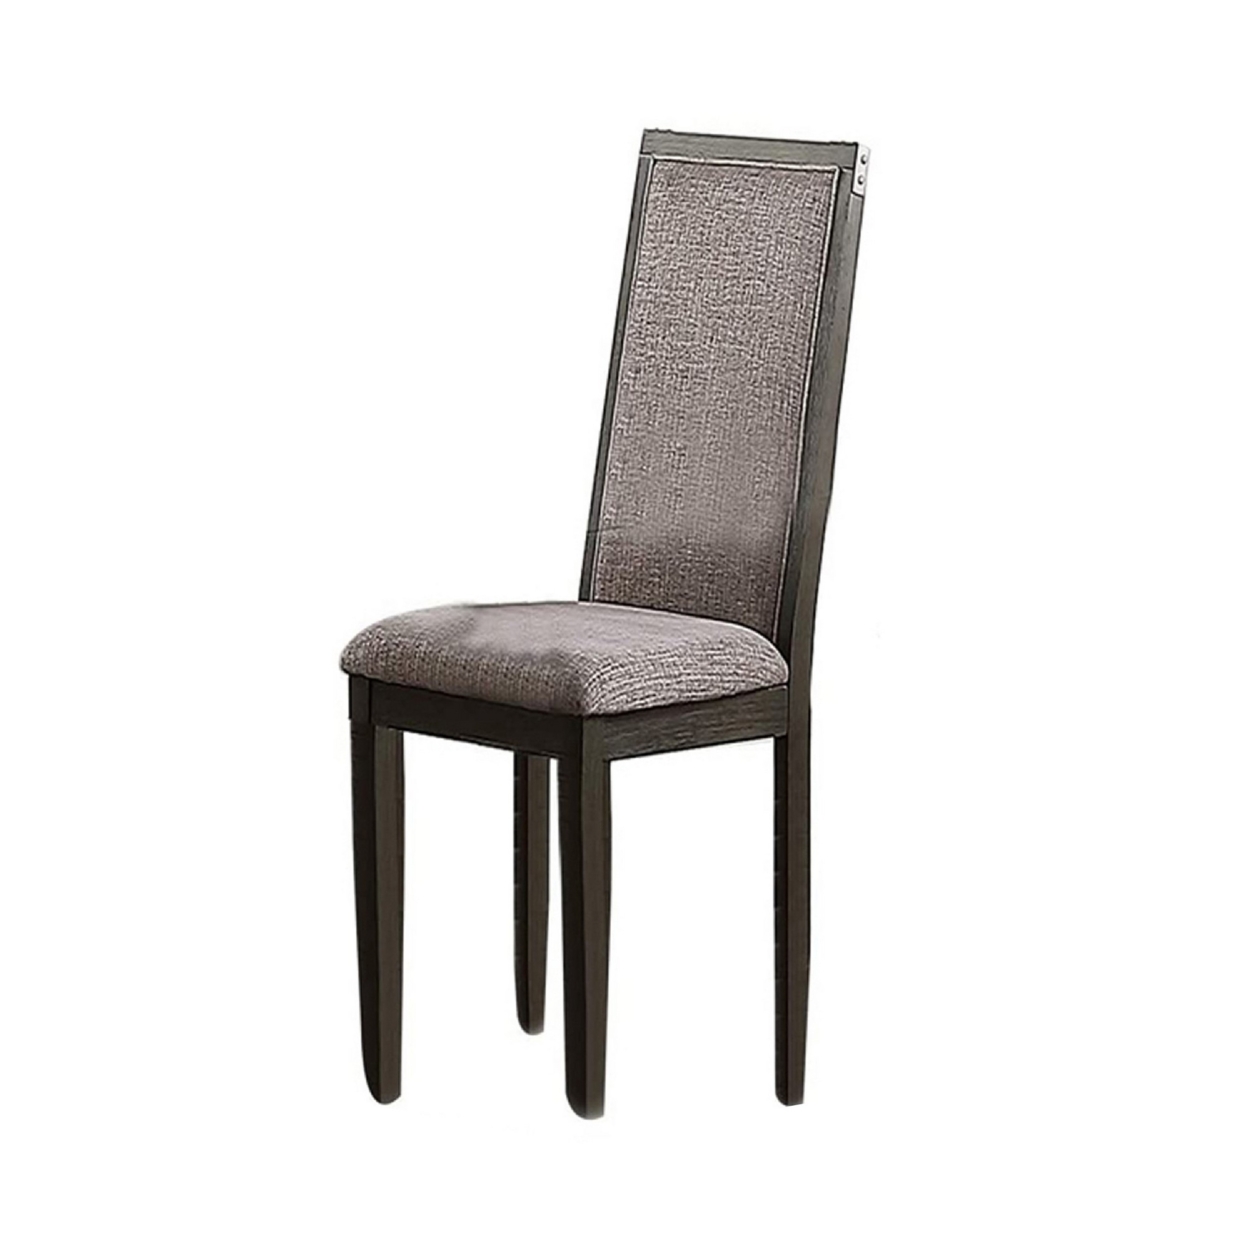 Kumi 25 Inch Set Of 2 Wood Dining Chairs With Slatted Cushioned Backs, Gray